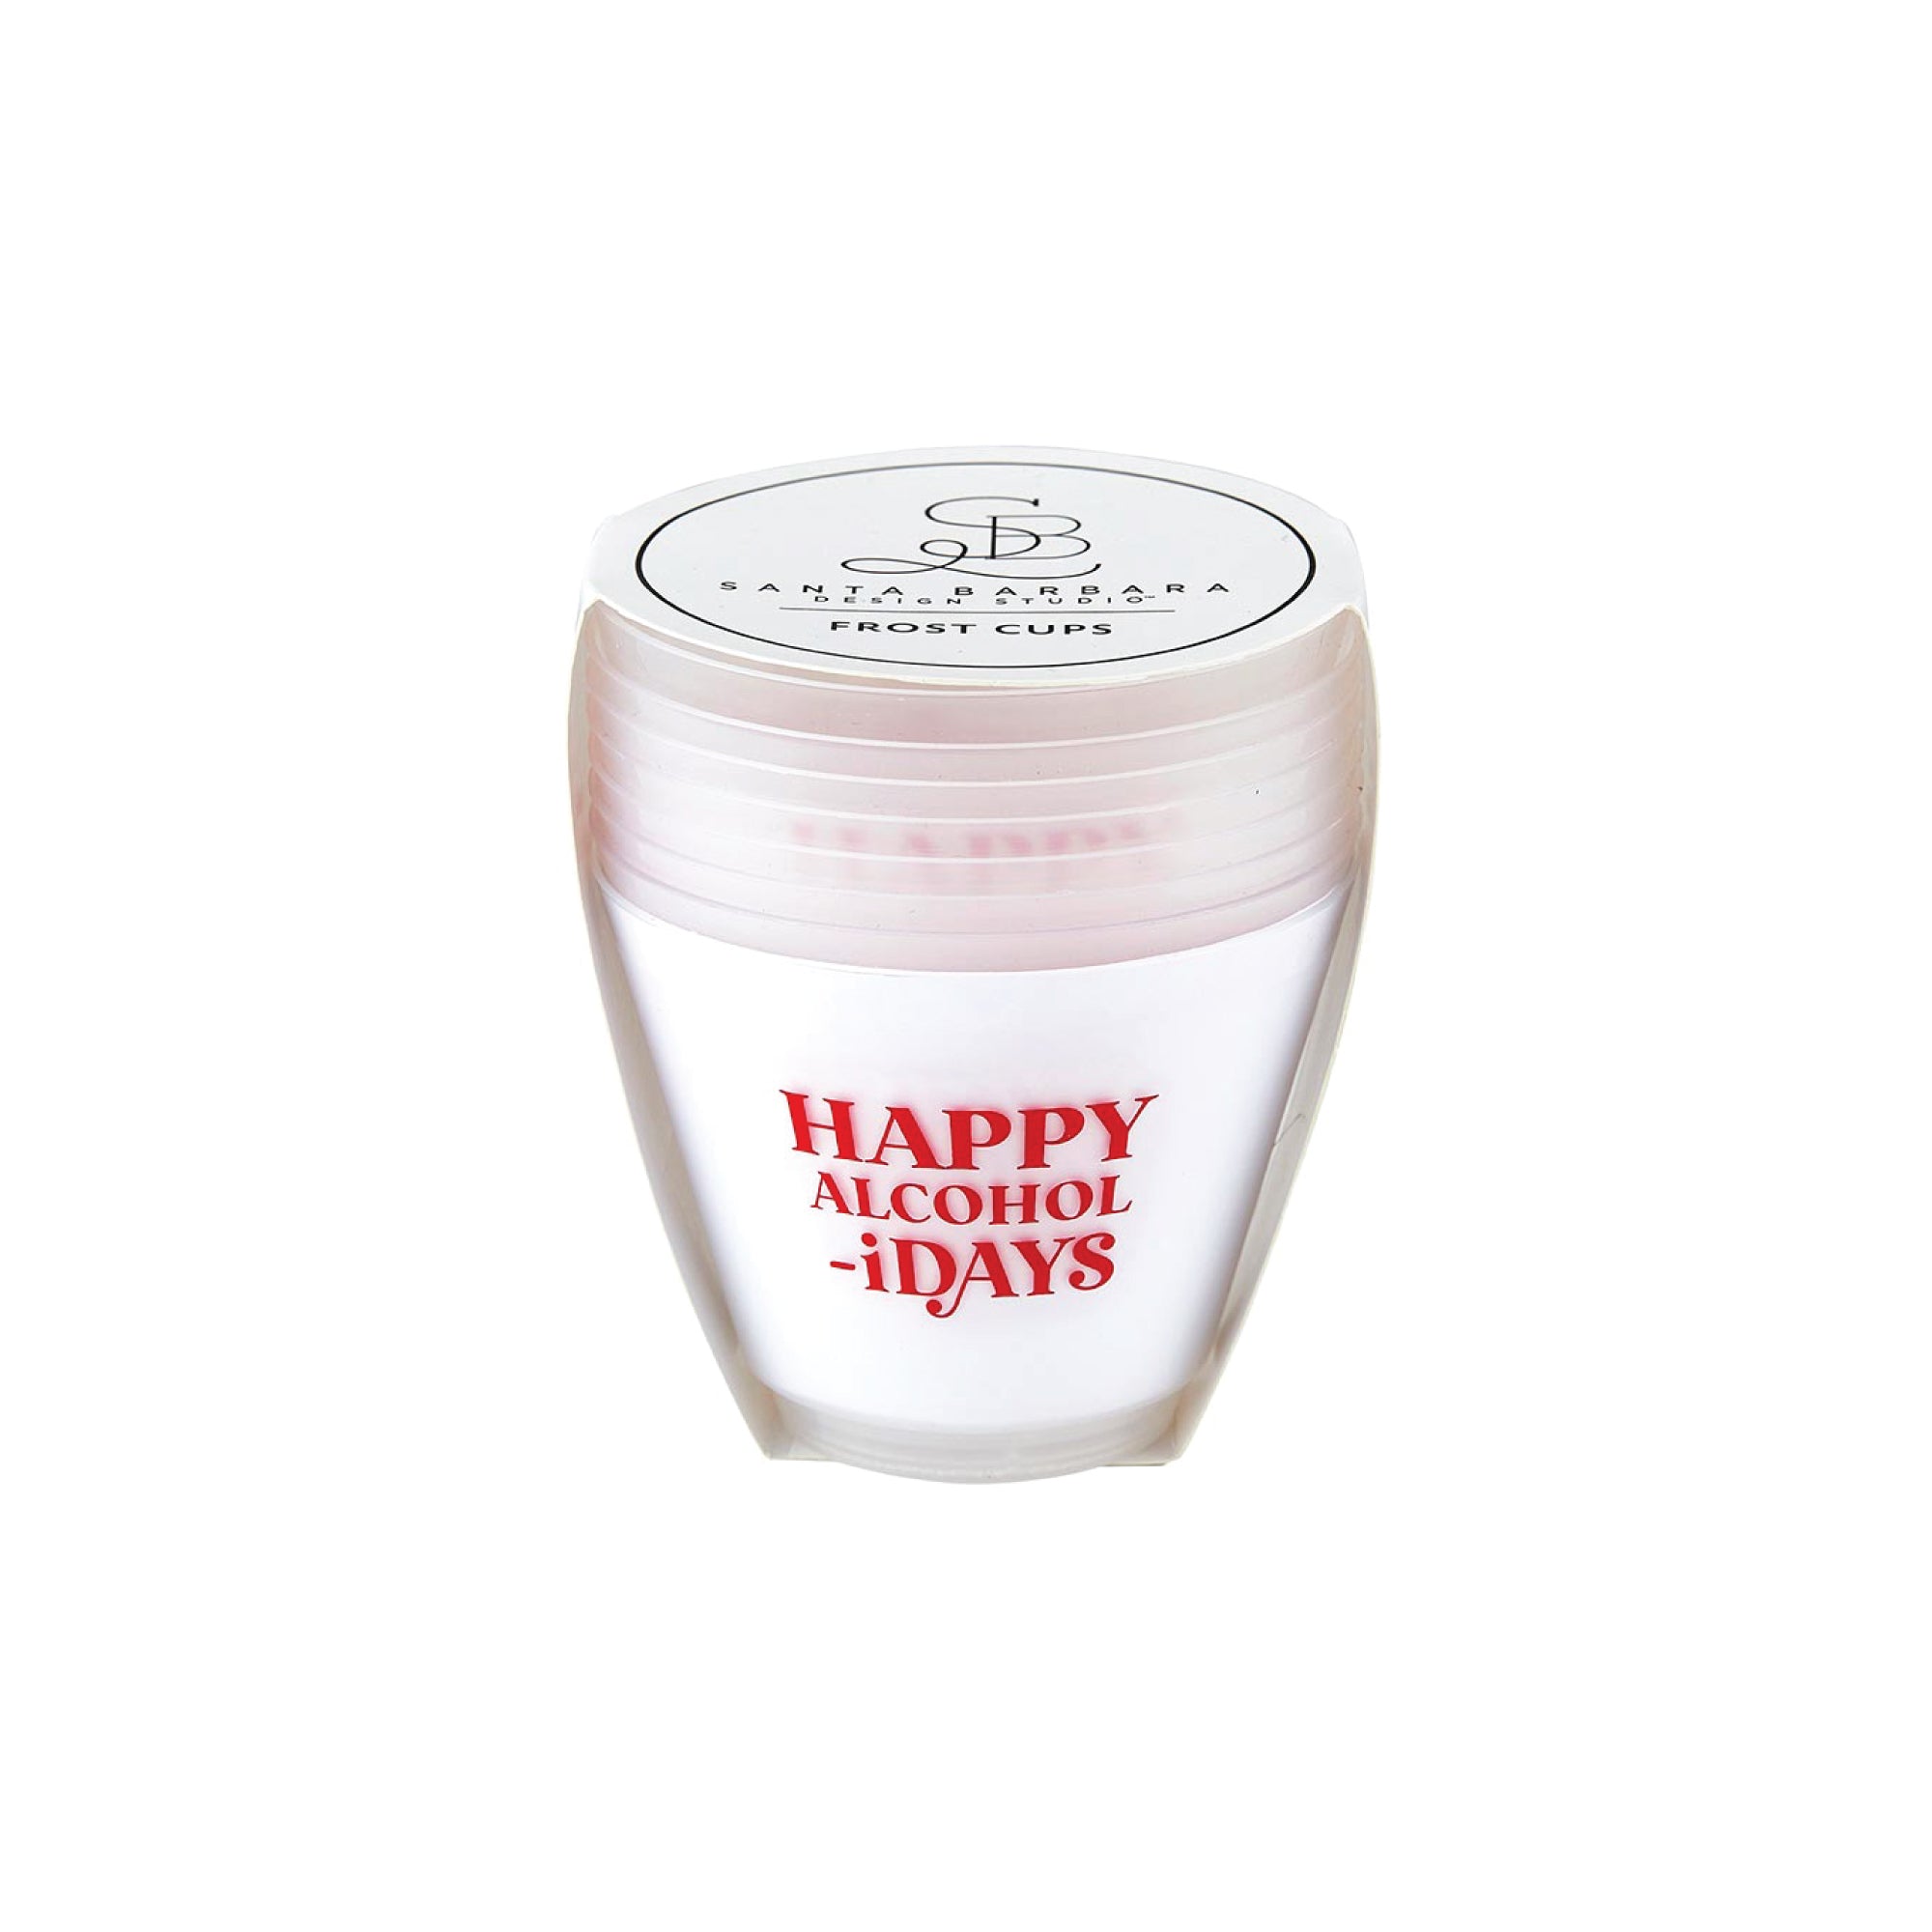 Happy Alcohol-idays Plastic Frosted Wine Cups 8ct | The Party Darling